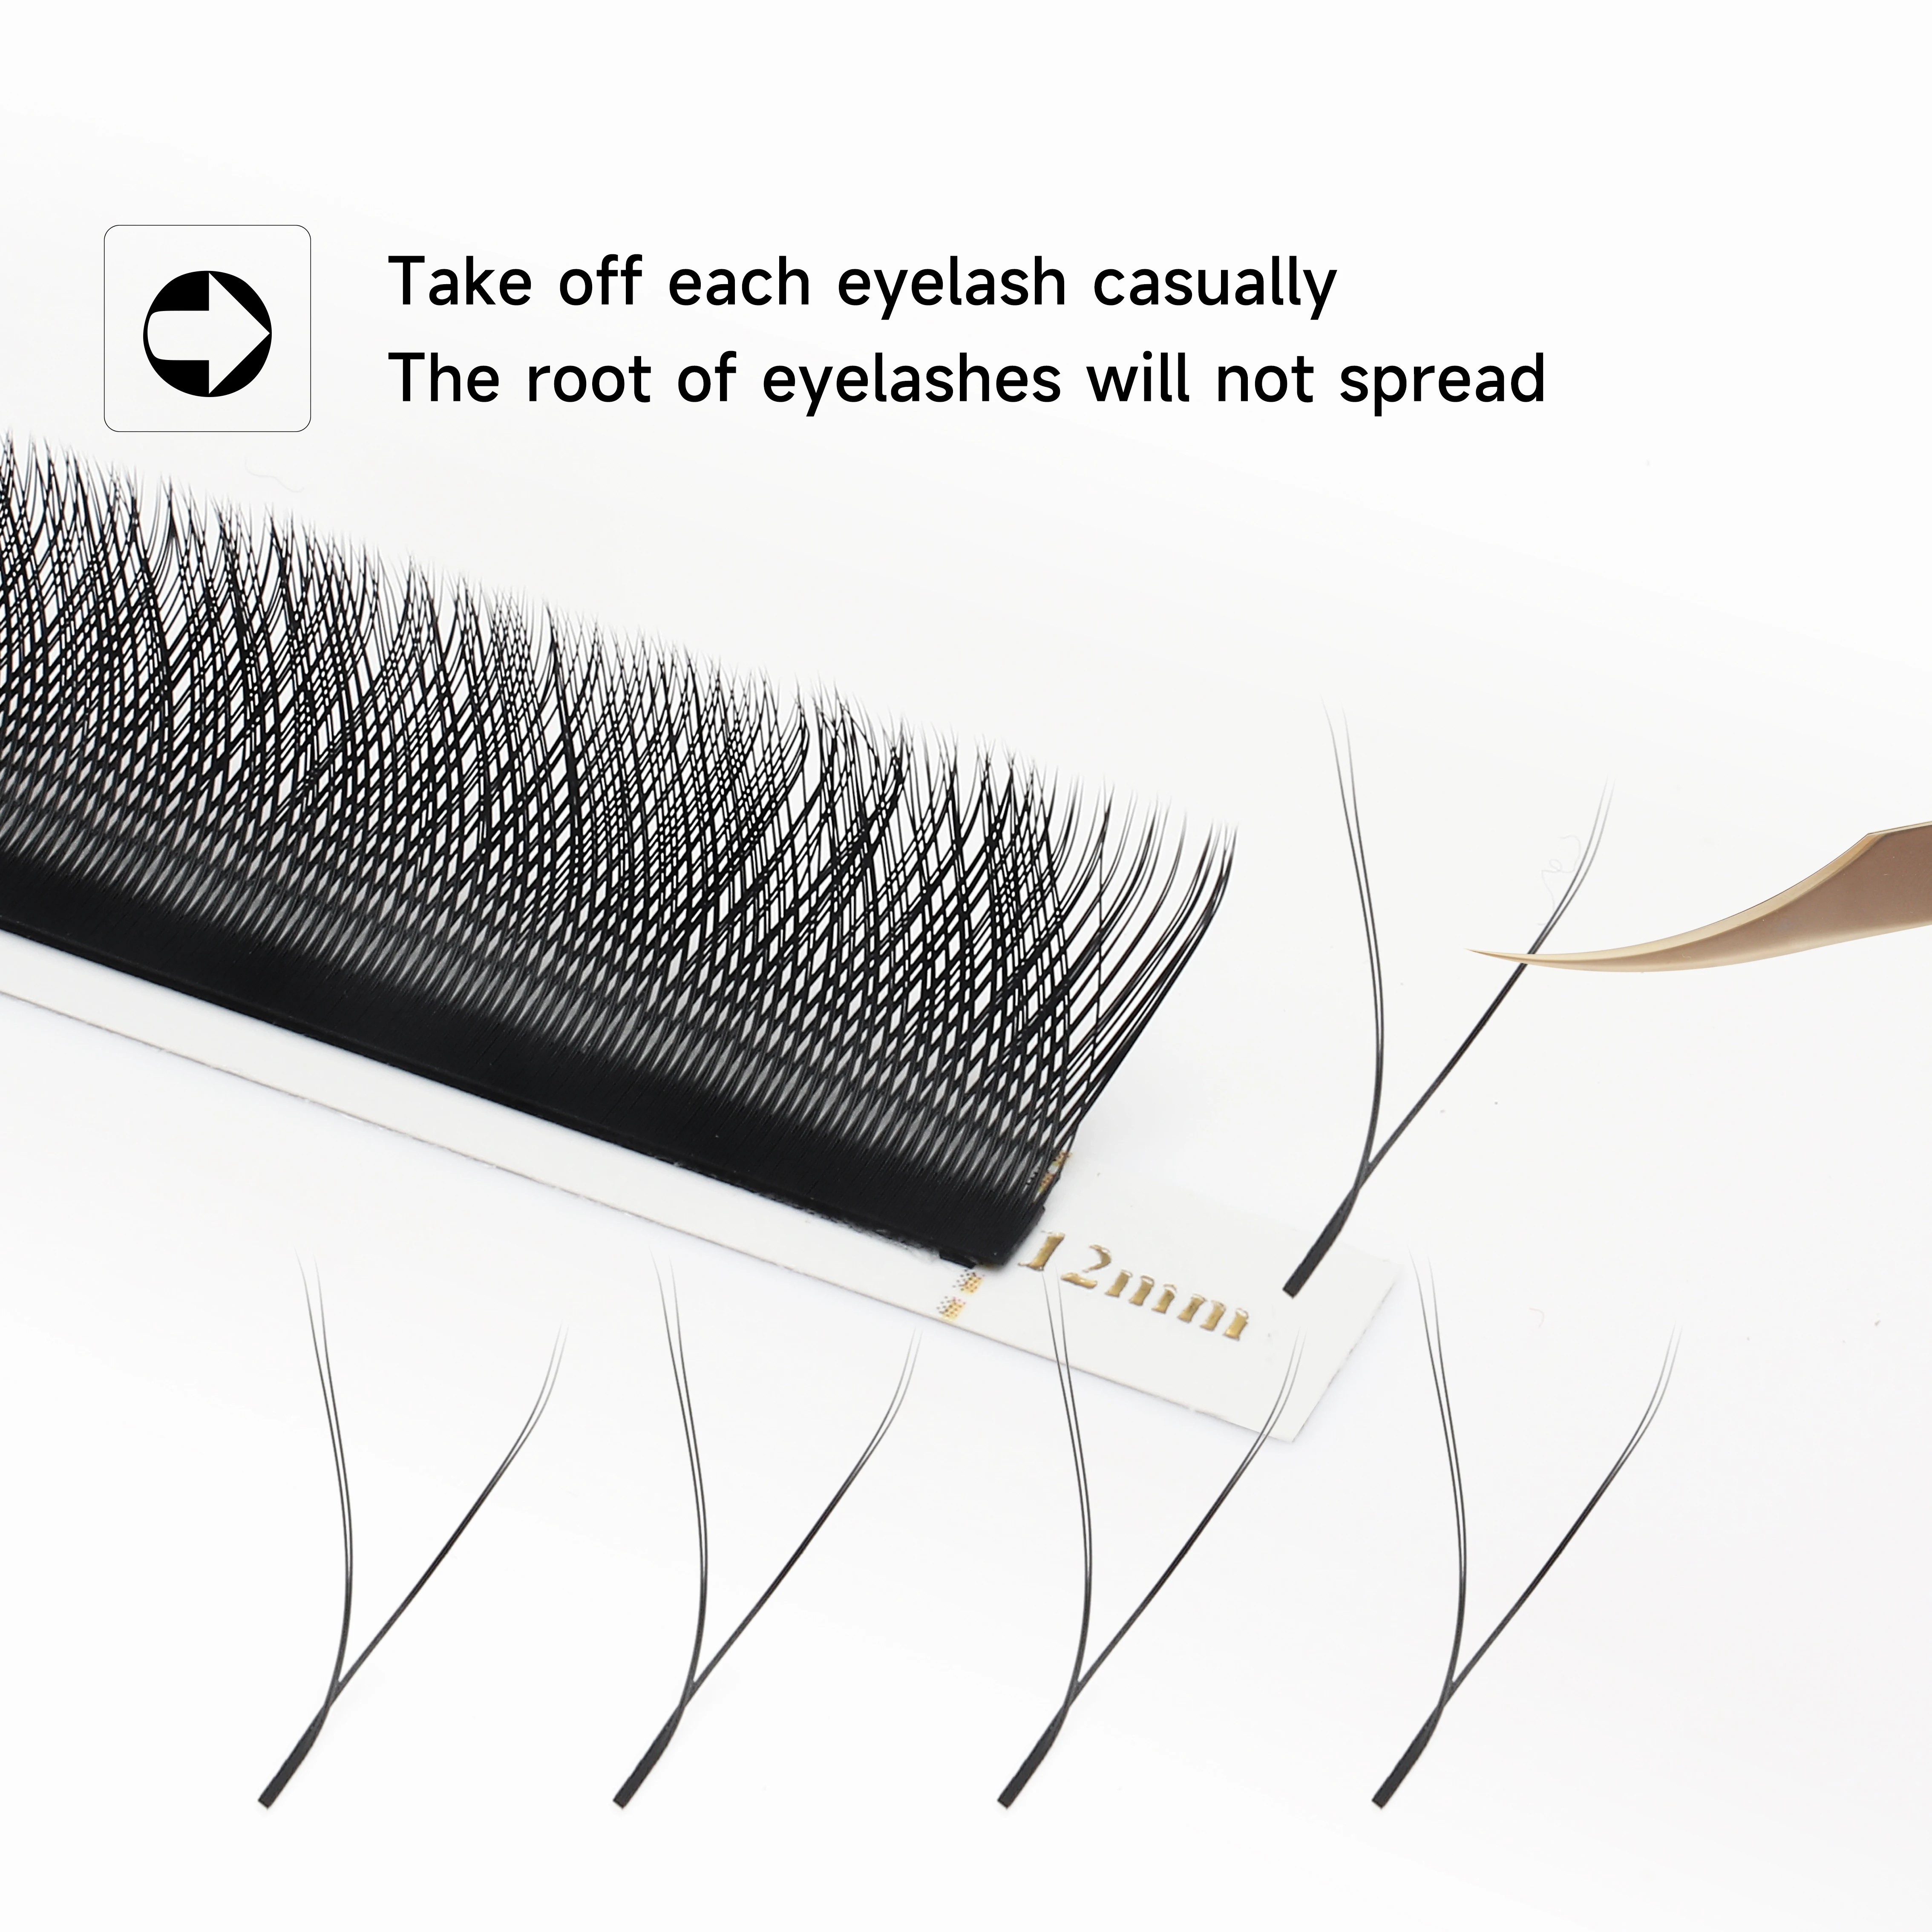 XIUSUZAKI W Shaped Bloom 2D 3D 4D 5D 6D 7D 8D Automatic Flowering Premade Fans Eyelashes Extensions Natural yy Individual Lashes